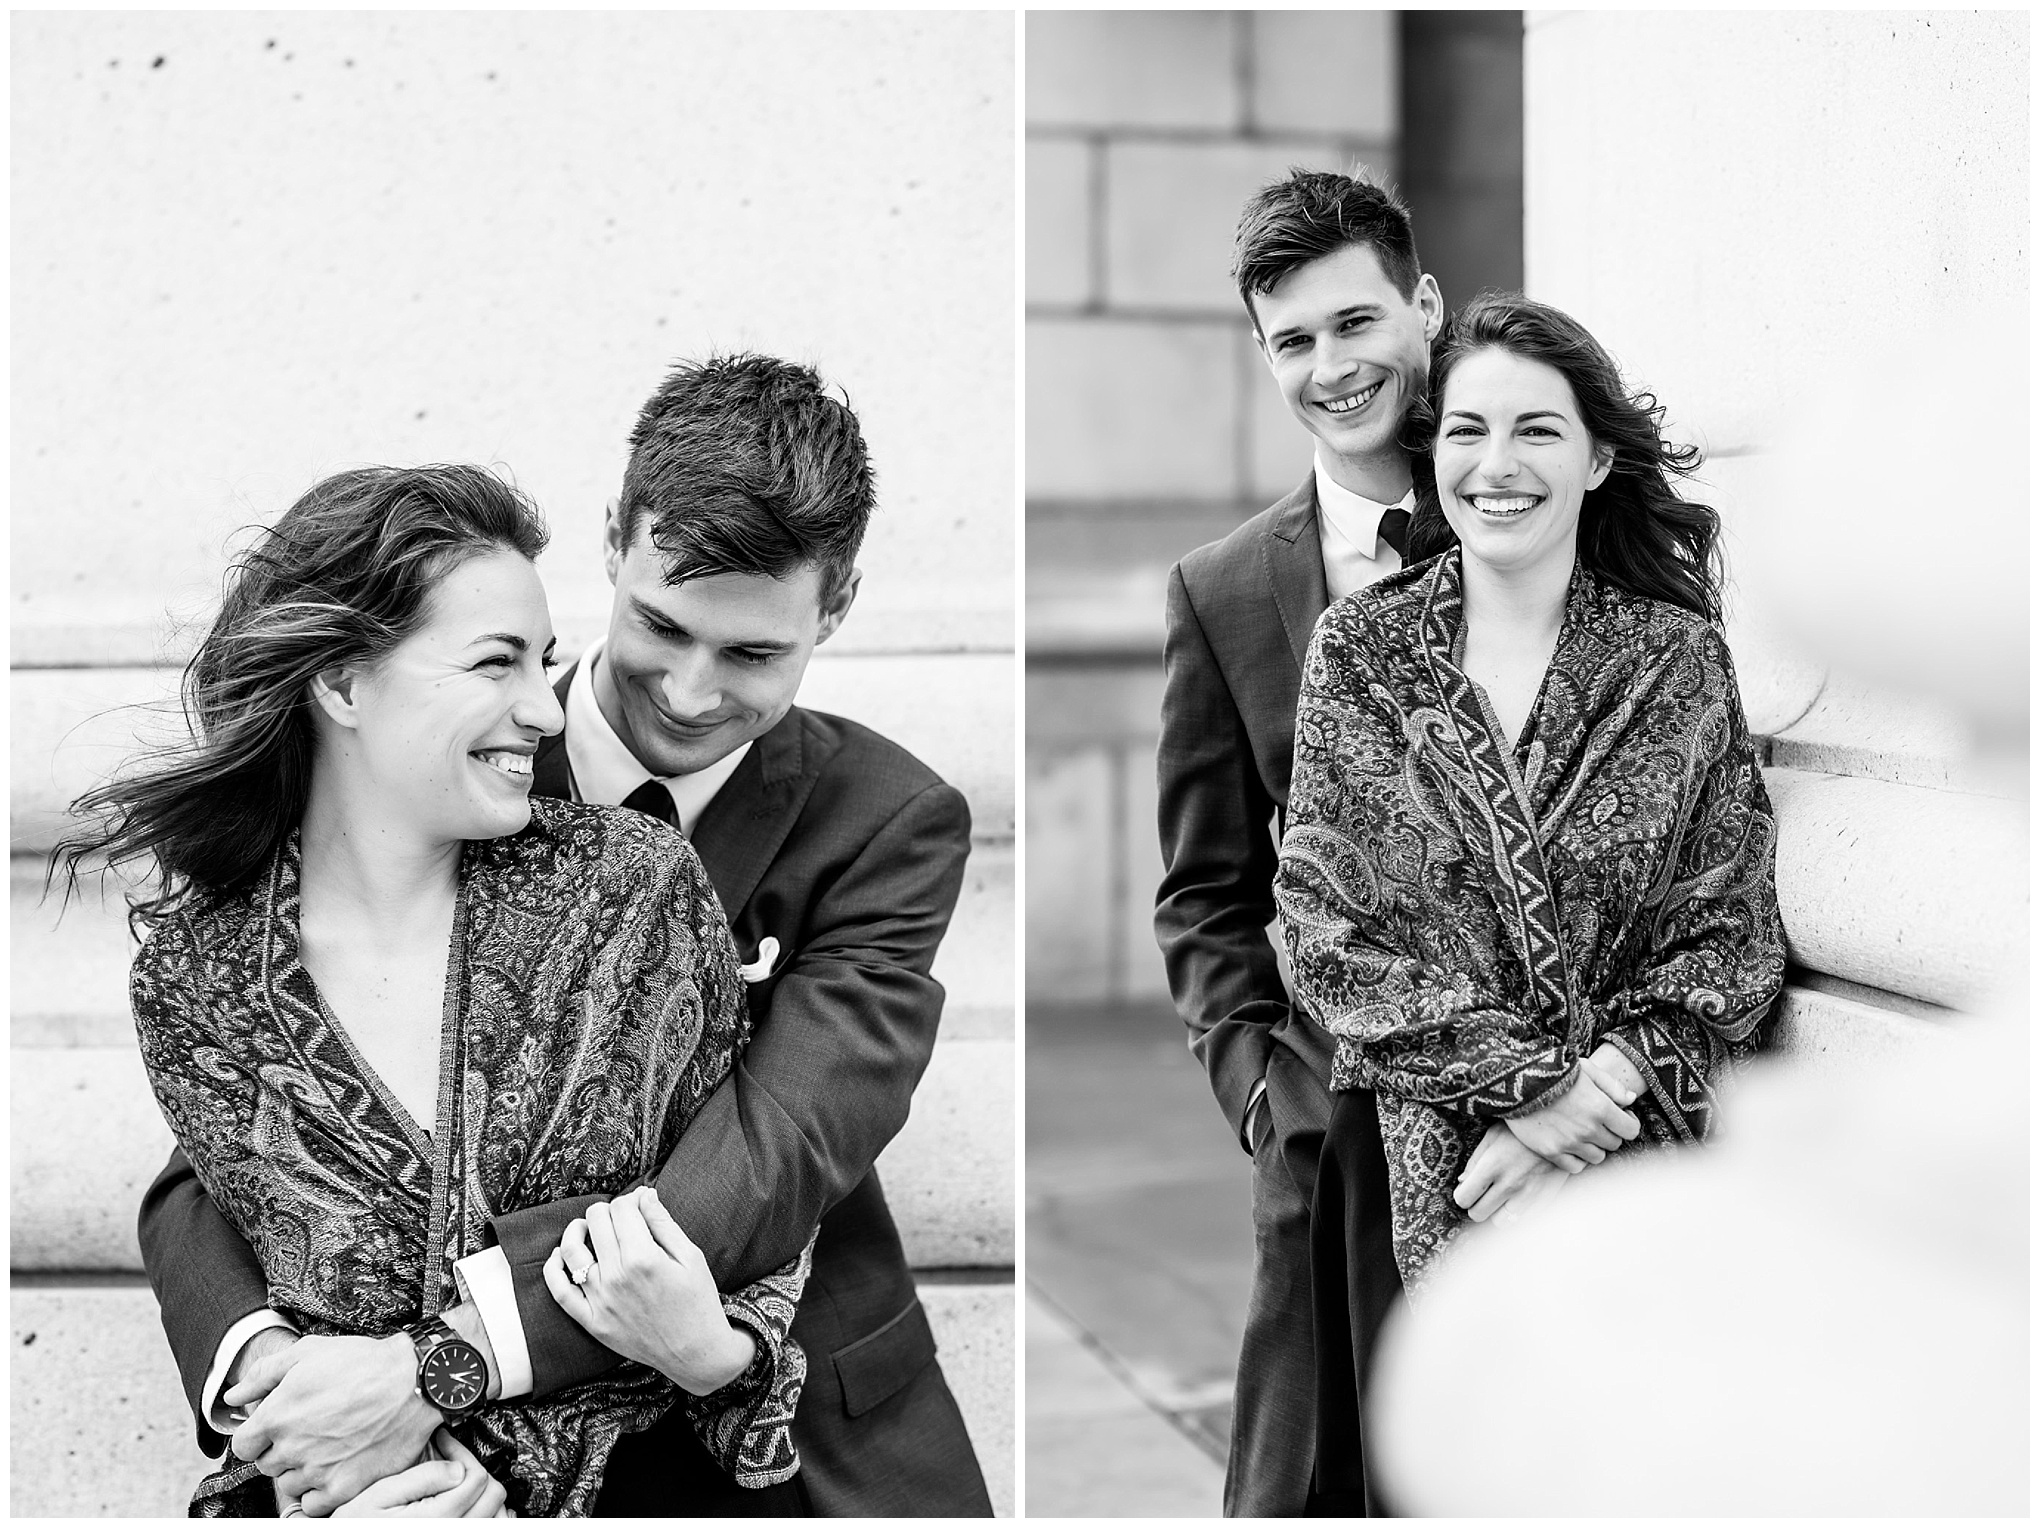 black and white engagement photos, black and white photography, black and white photos, engagement photos, black and white D.C., D.C. engagement photos, classic engagement photos, traditional engagement photos, engagement photos poses, classic architecture, D.C. architecture, Union Station D.C., Union Station, engaged couple, relationship goals, joyful couple, black and white sessions, couple laughing